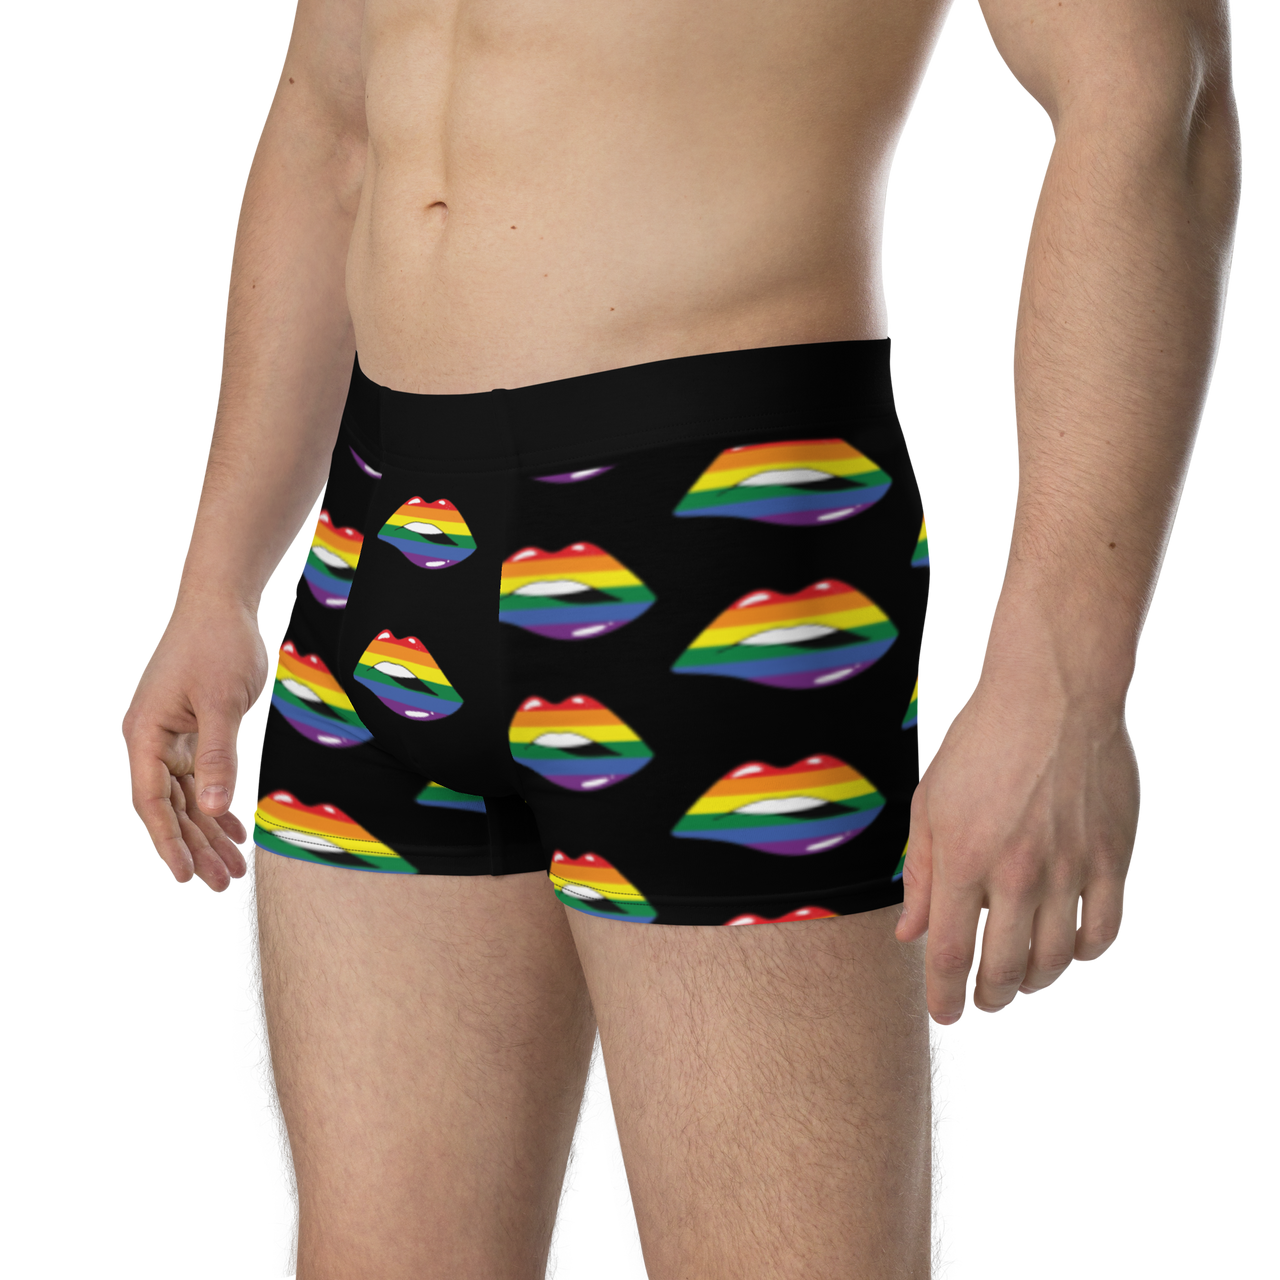 LGBTQ Flag Kisses Underwear for Her/Him or They/Them - Black SHAVA